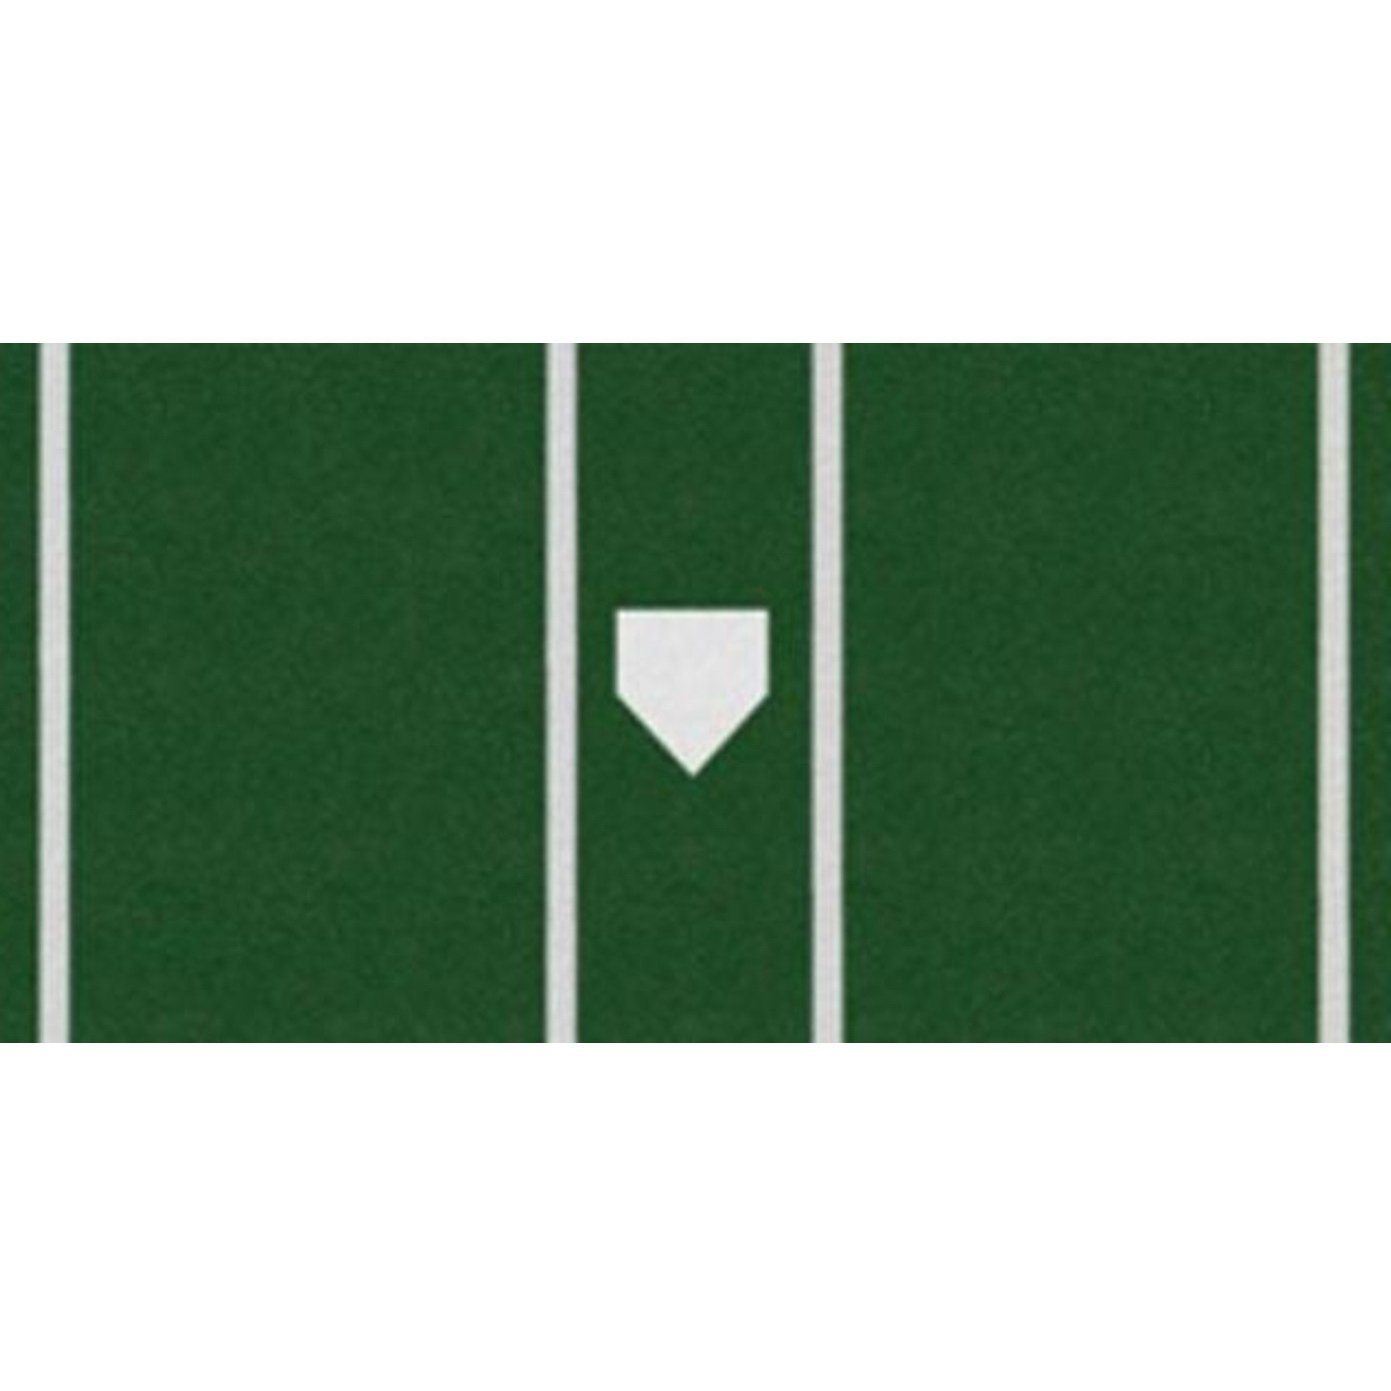 ProTurf Baseball Home Plate Mat Green or Clay - Pitch Pro Direct